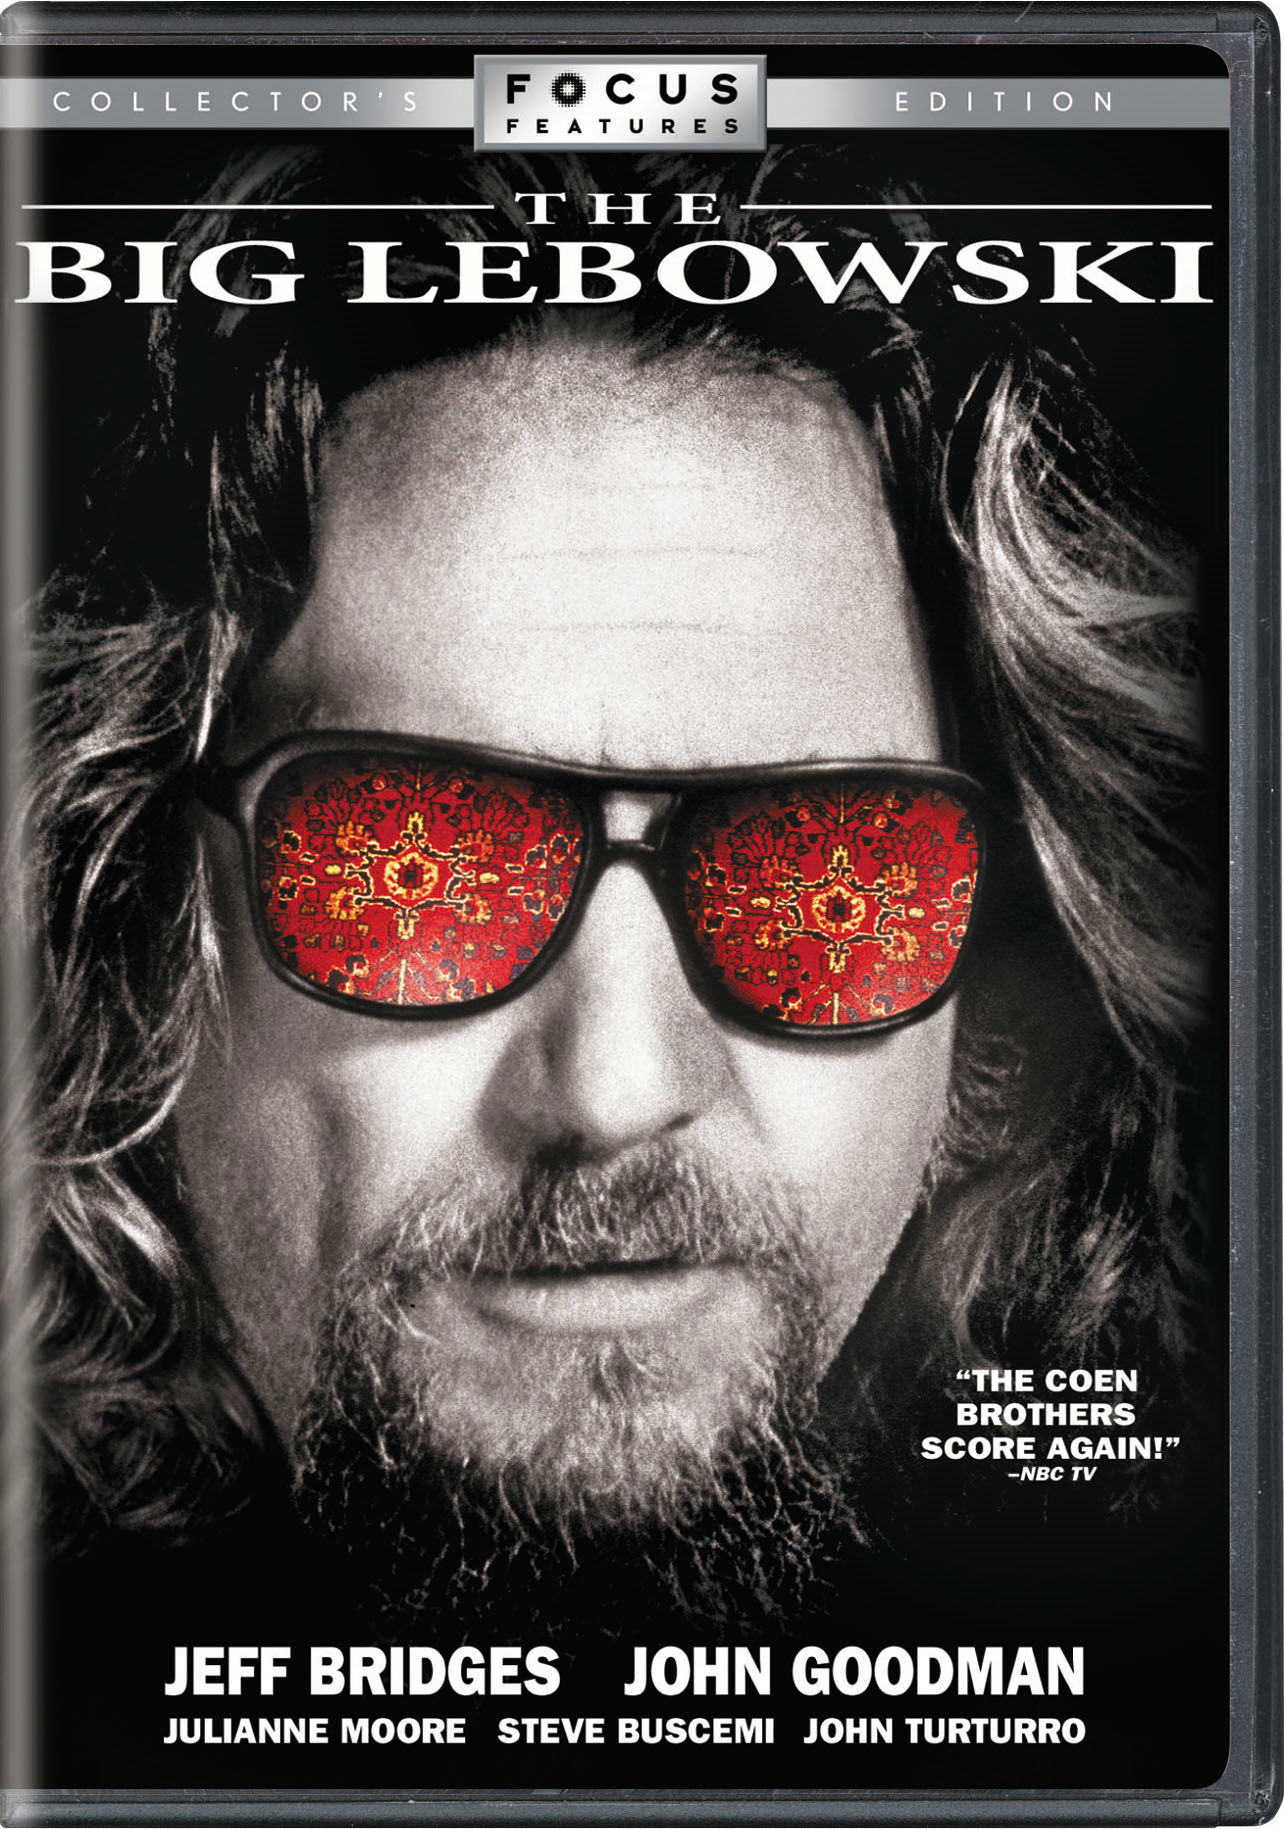 The Big Lebowski (Widescreen Collector's Edition) - DVD [ 1998 ]  - Comedy Movies On DVD - Movies On GRUV